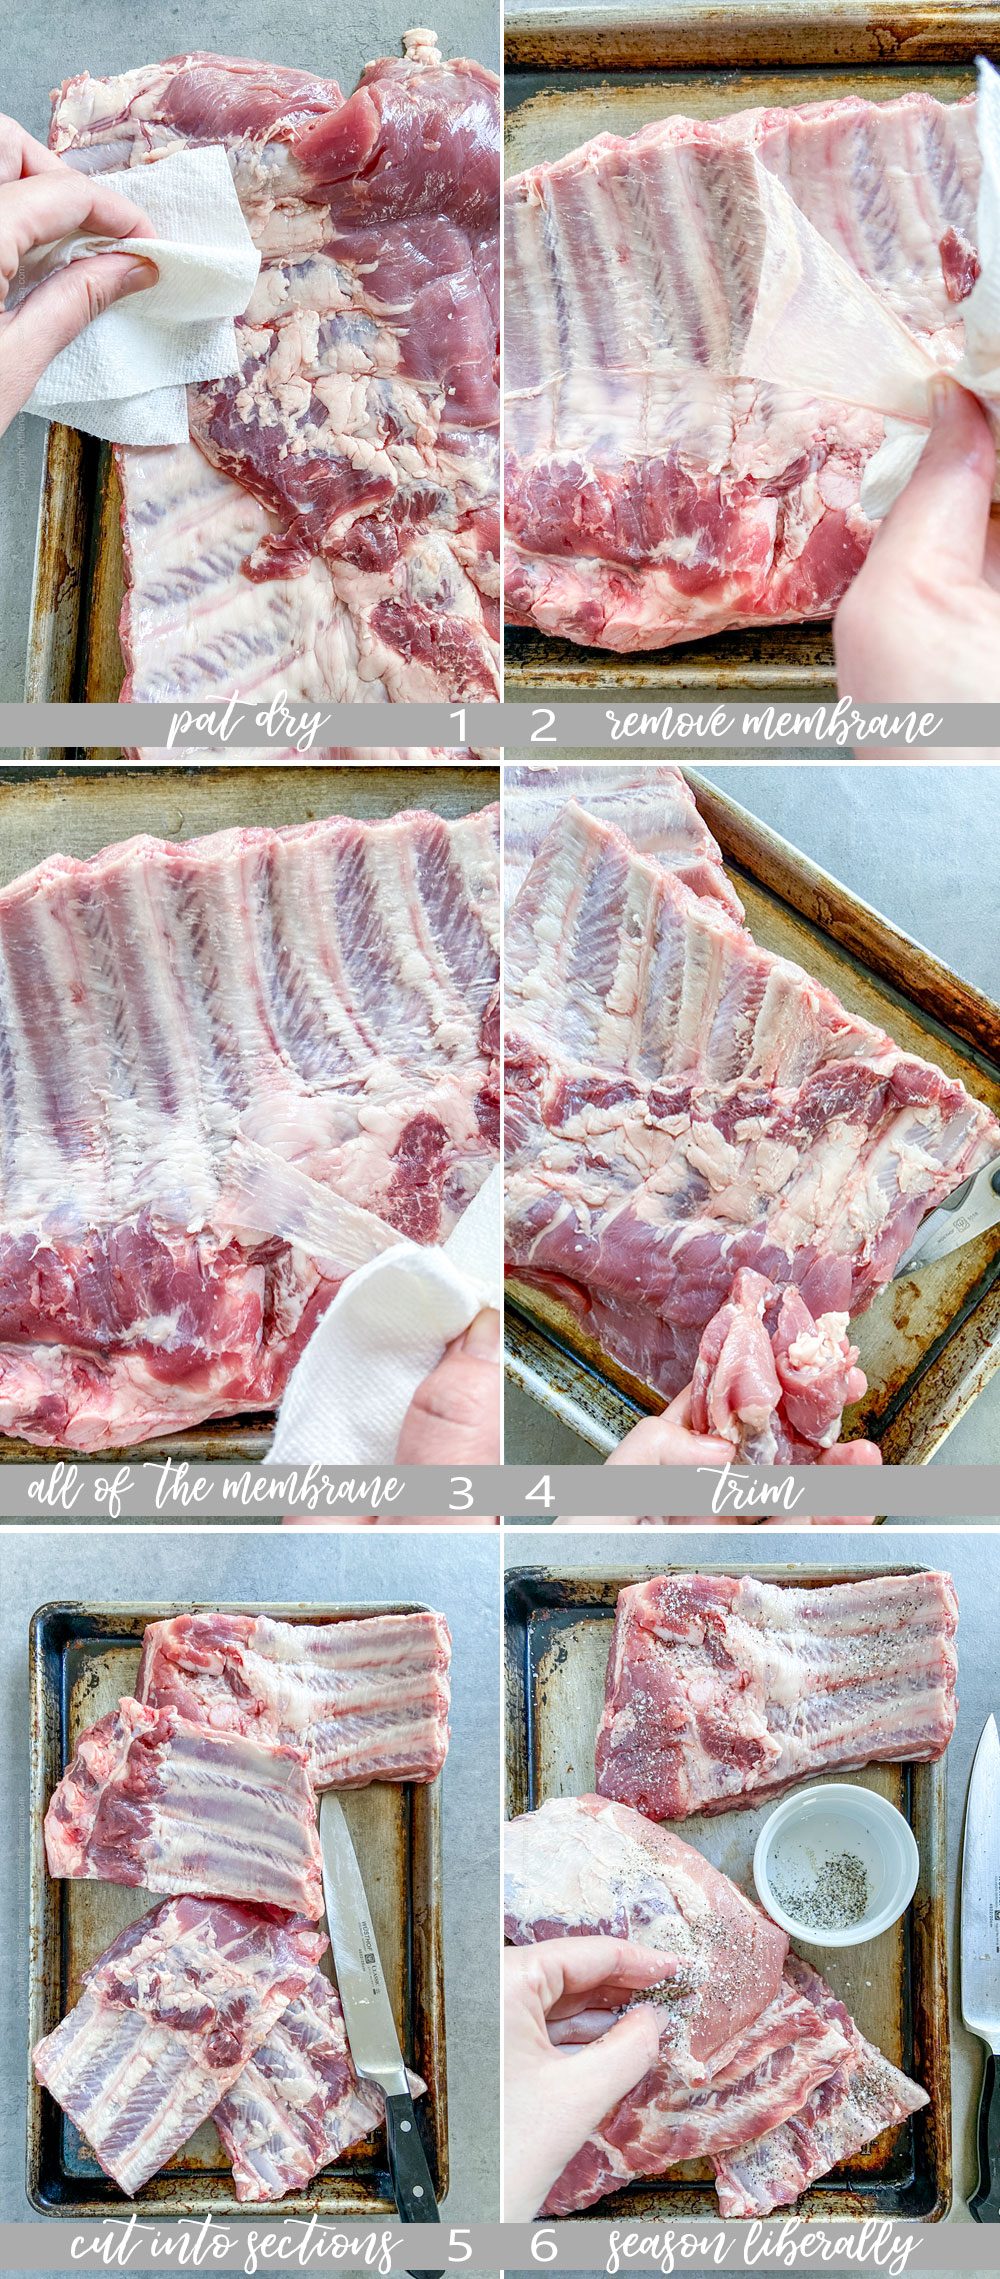 How to cut spare ribs for braising